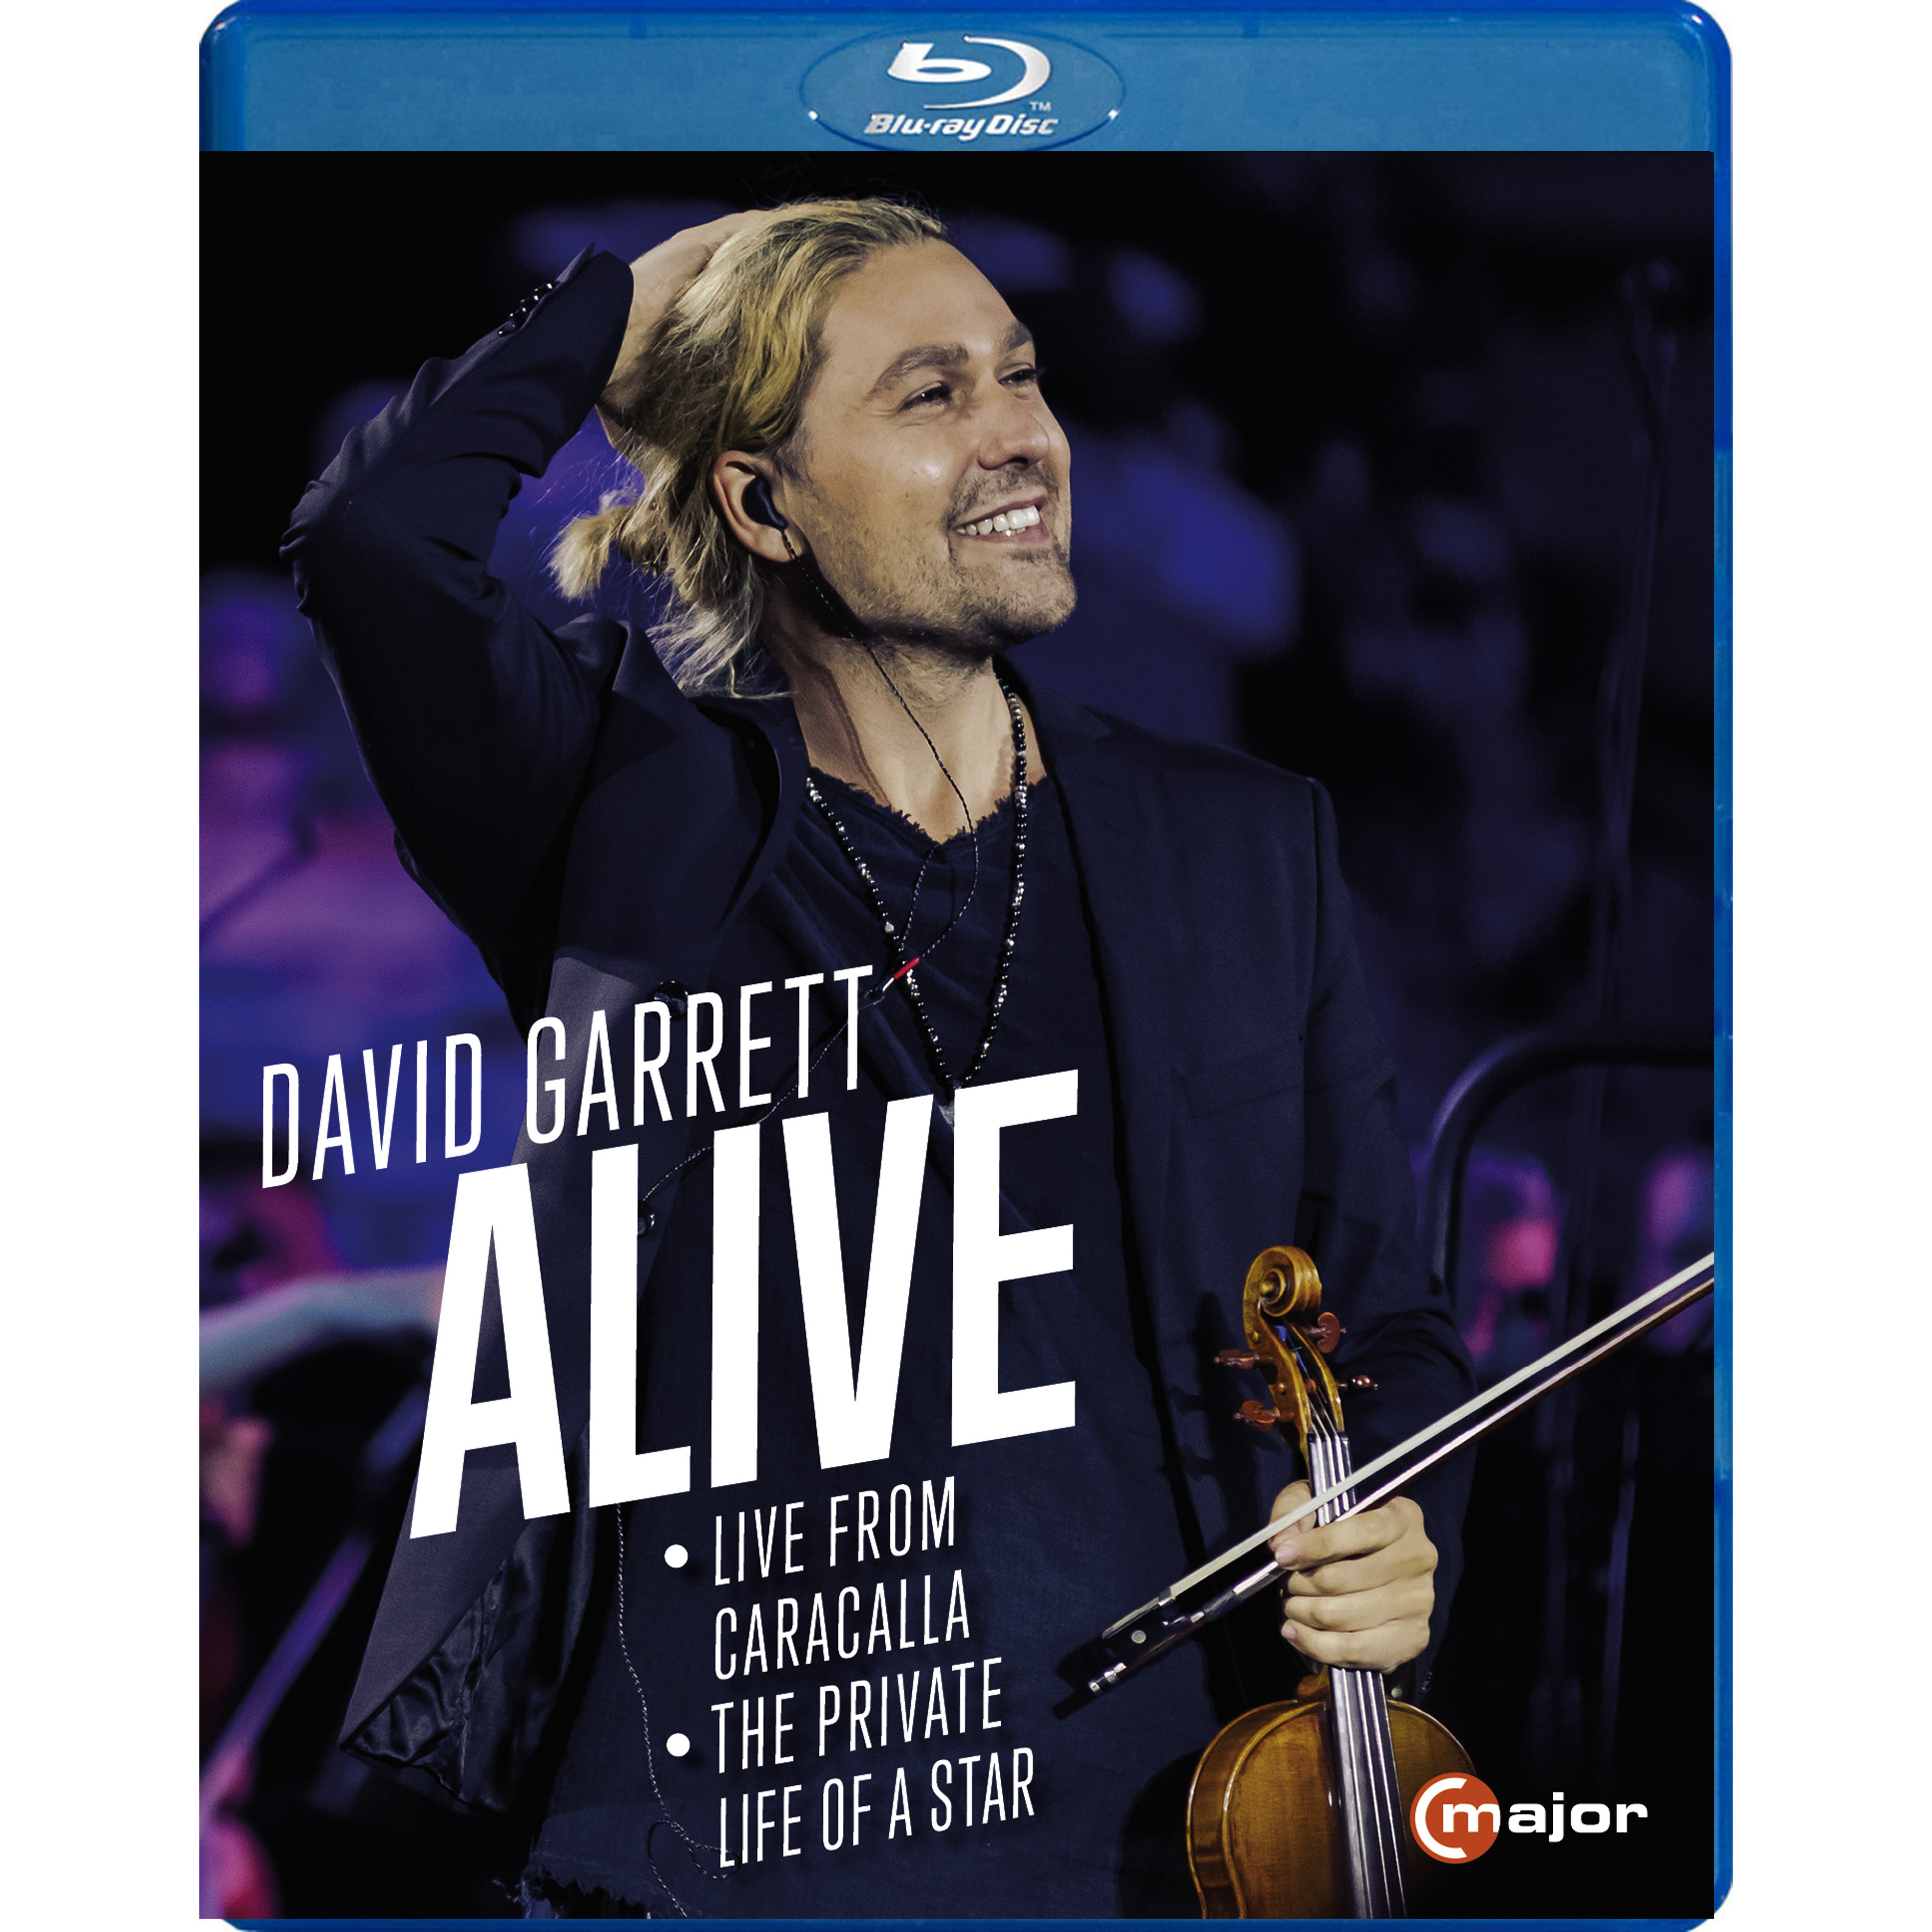 ALIVE LIVE FROM CARACALLA BLU-RAY